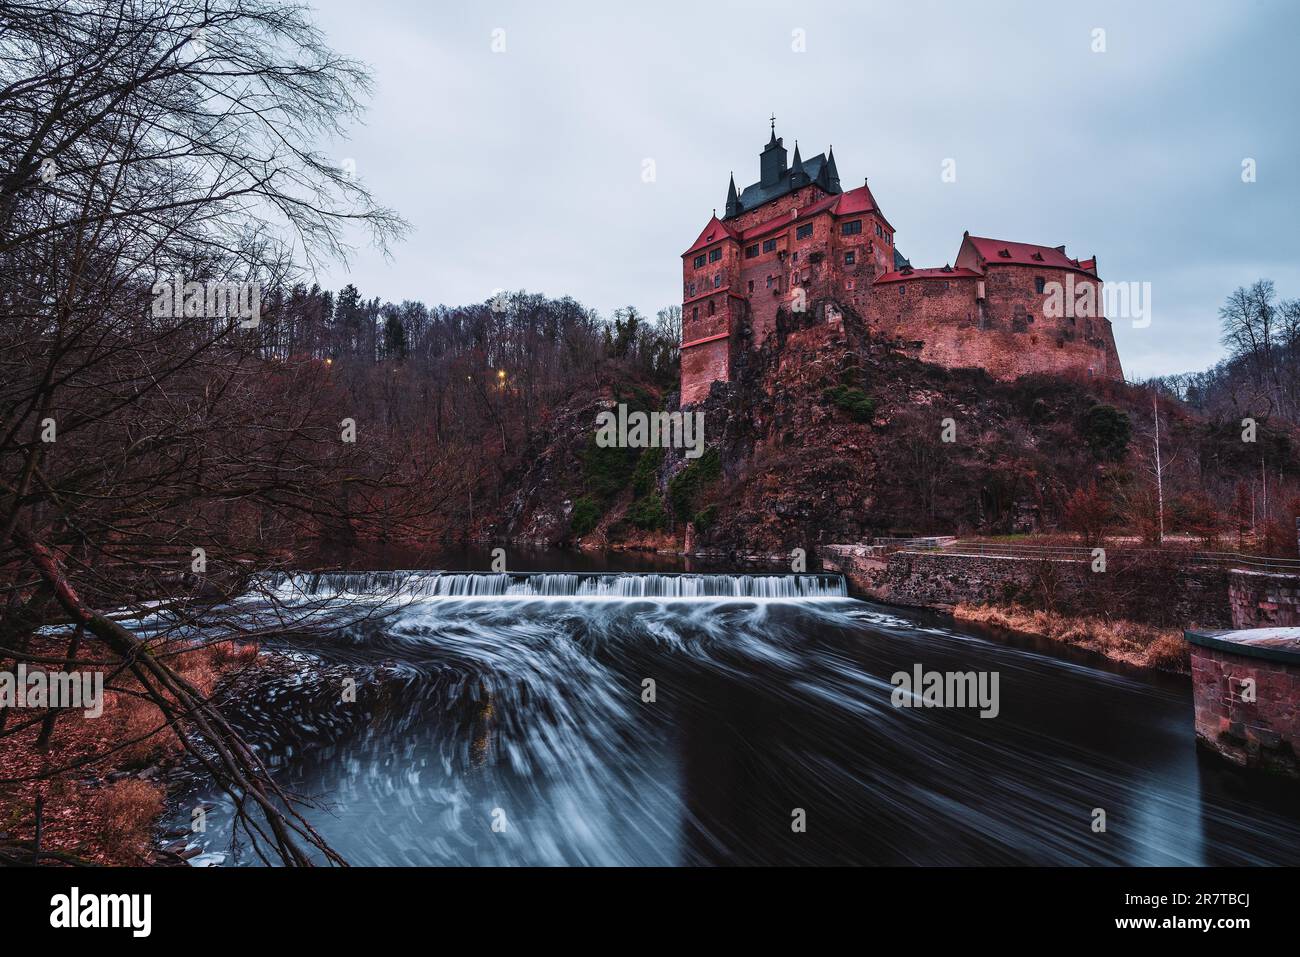 Panoramic view of the knight castle Kriebstein, Germany Stock Photo